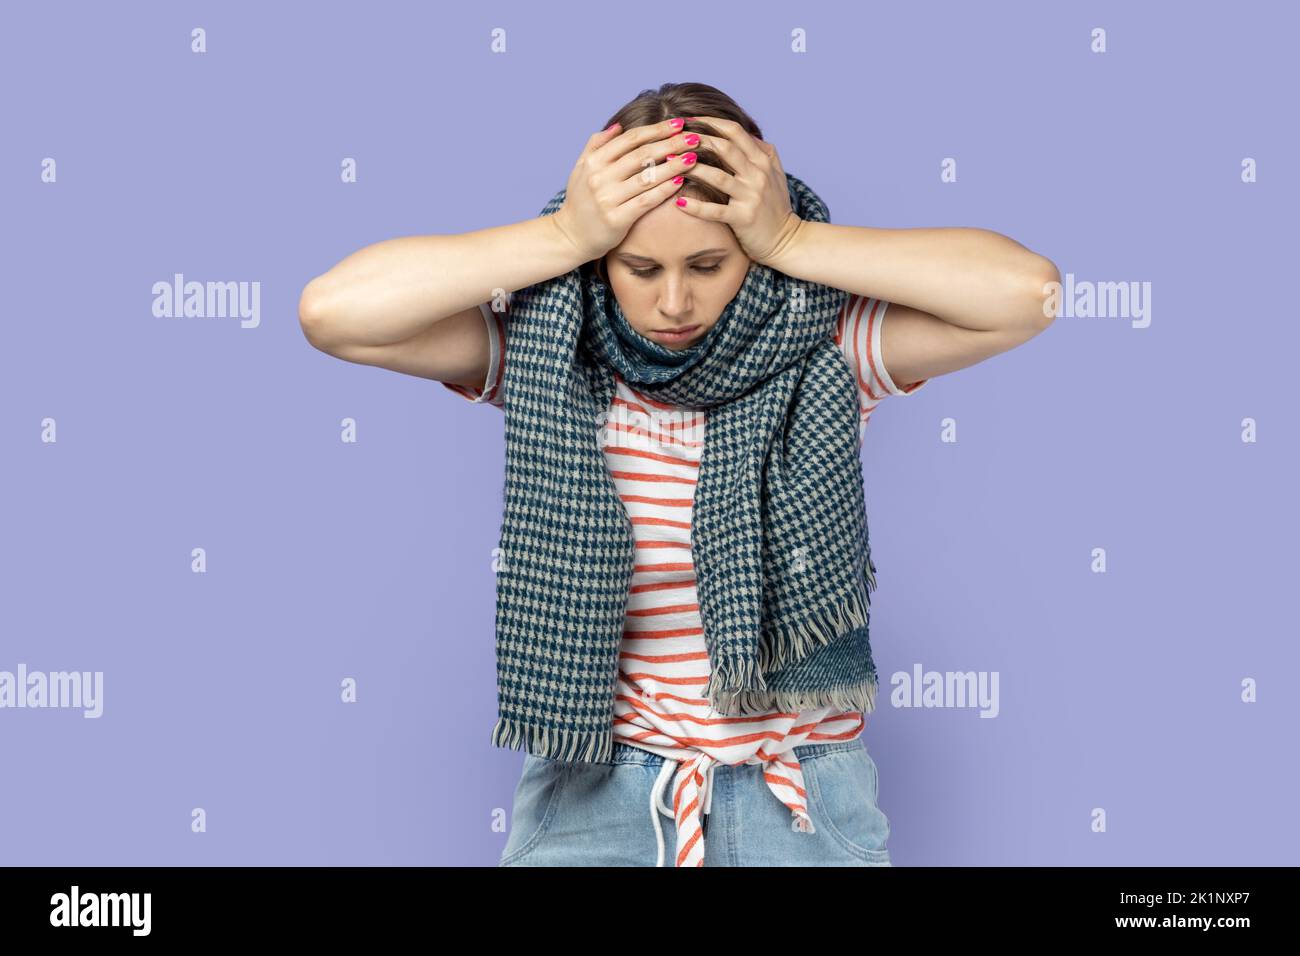 Portrait of sick unhealthy woman wearing striped T-shirt feels unwell, suffering terrible headache, standing wrapped in warm scarf, having influenza. Indoor studio shot isolated on purple background. Stock Photo